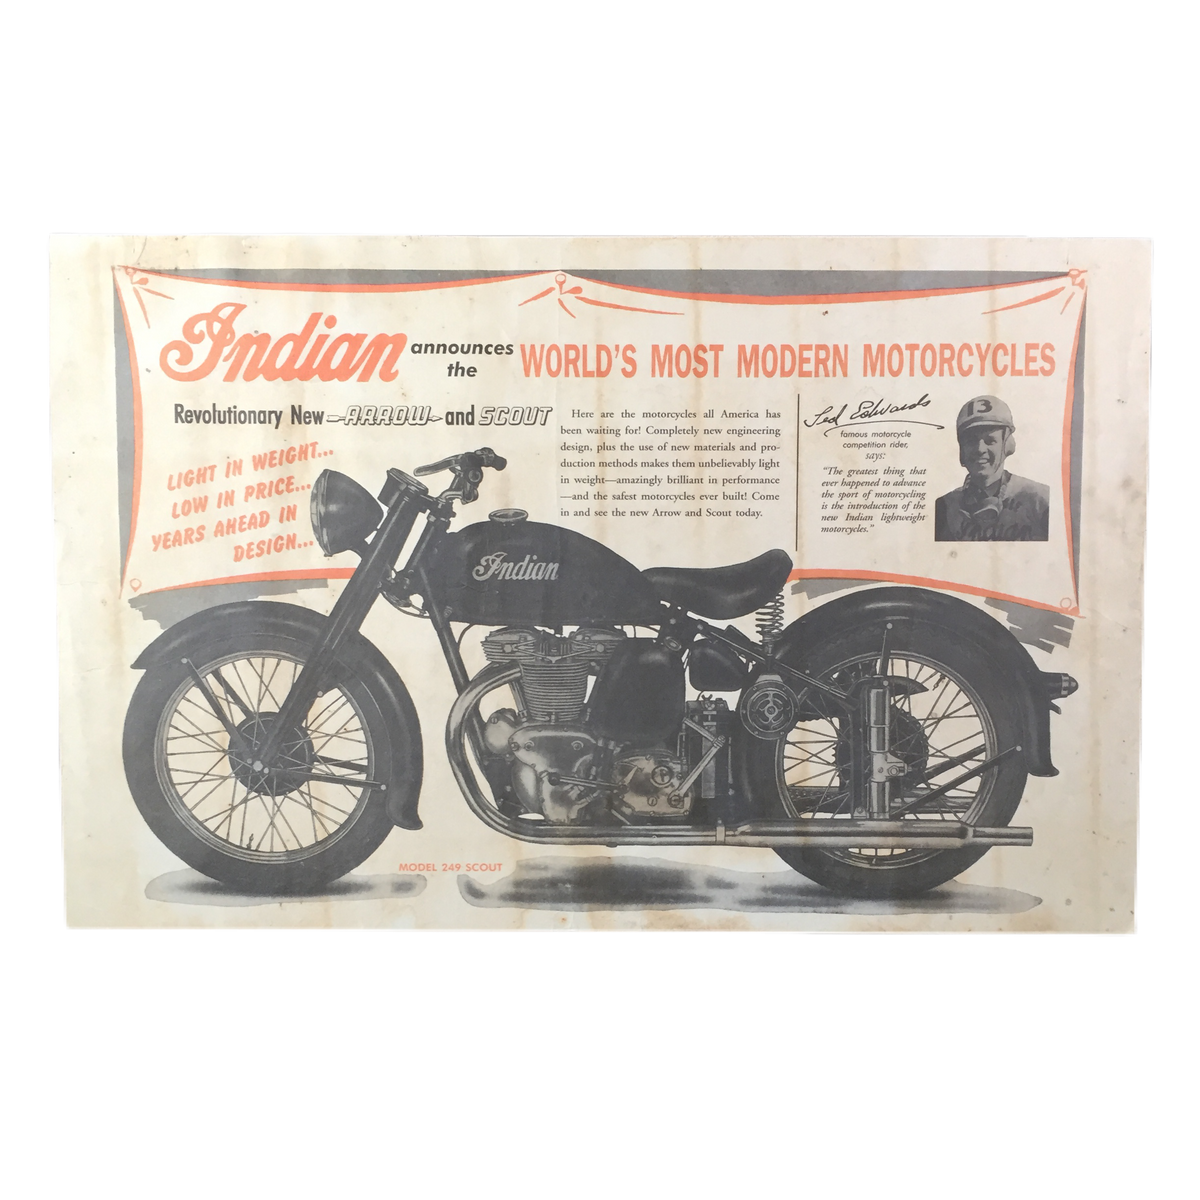 Vintage Indian Motorcycles “Model 249 Scout” Poster